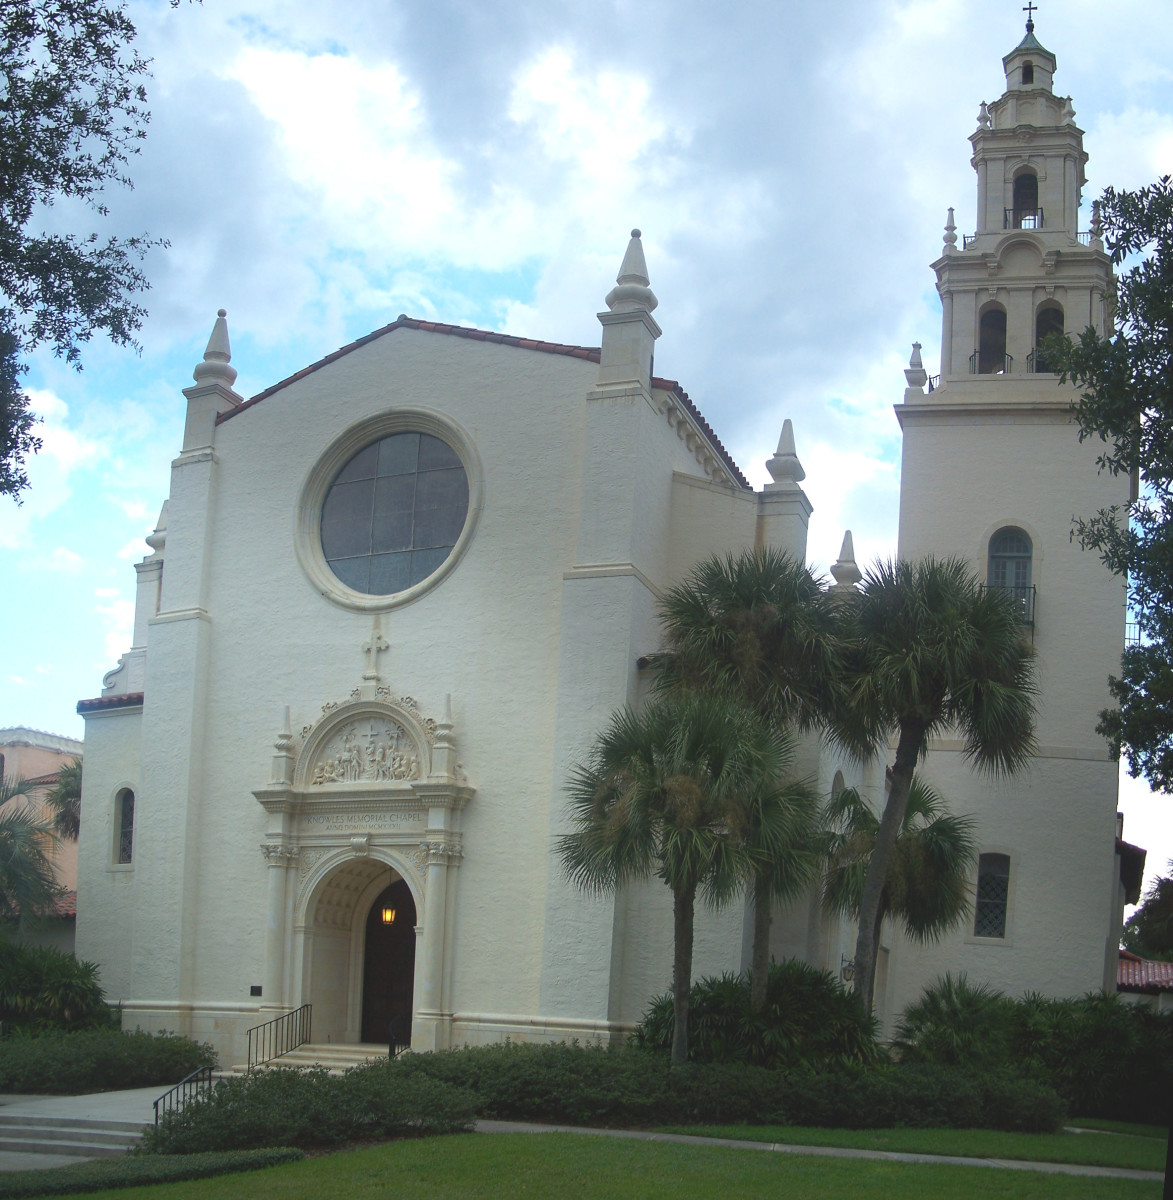 Knowles Memorial Chapel, Rollins College, Winter Park, FL by Edyabe http://creativecommons.org/licenses/by-sa/2.5